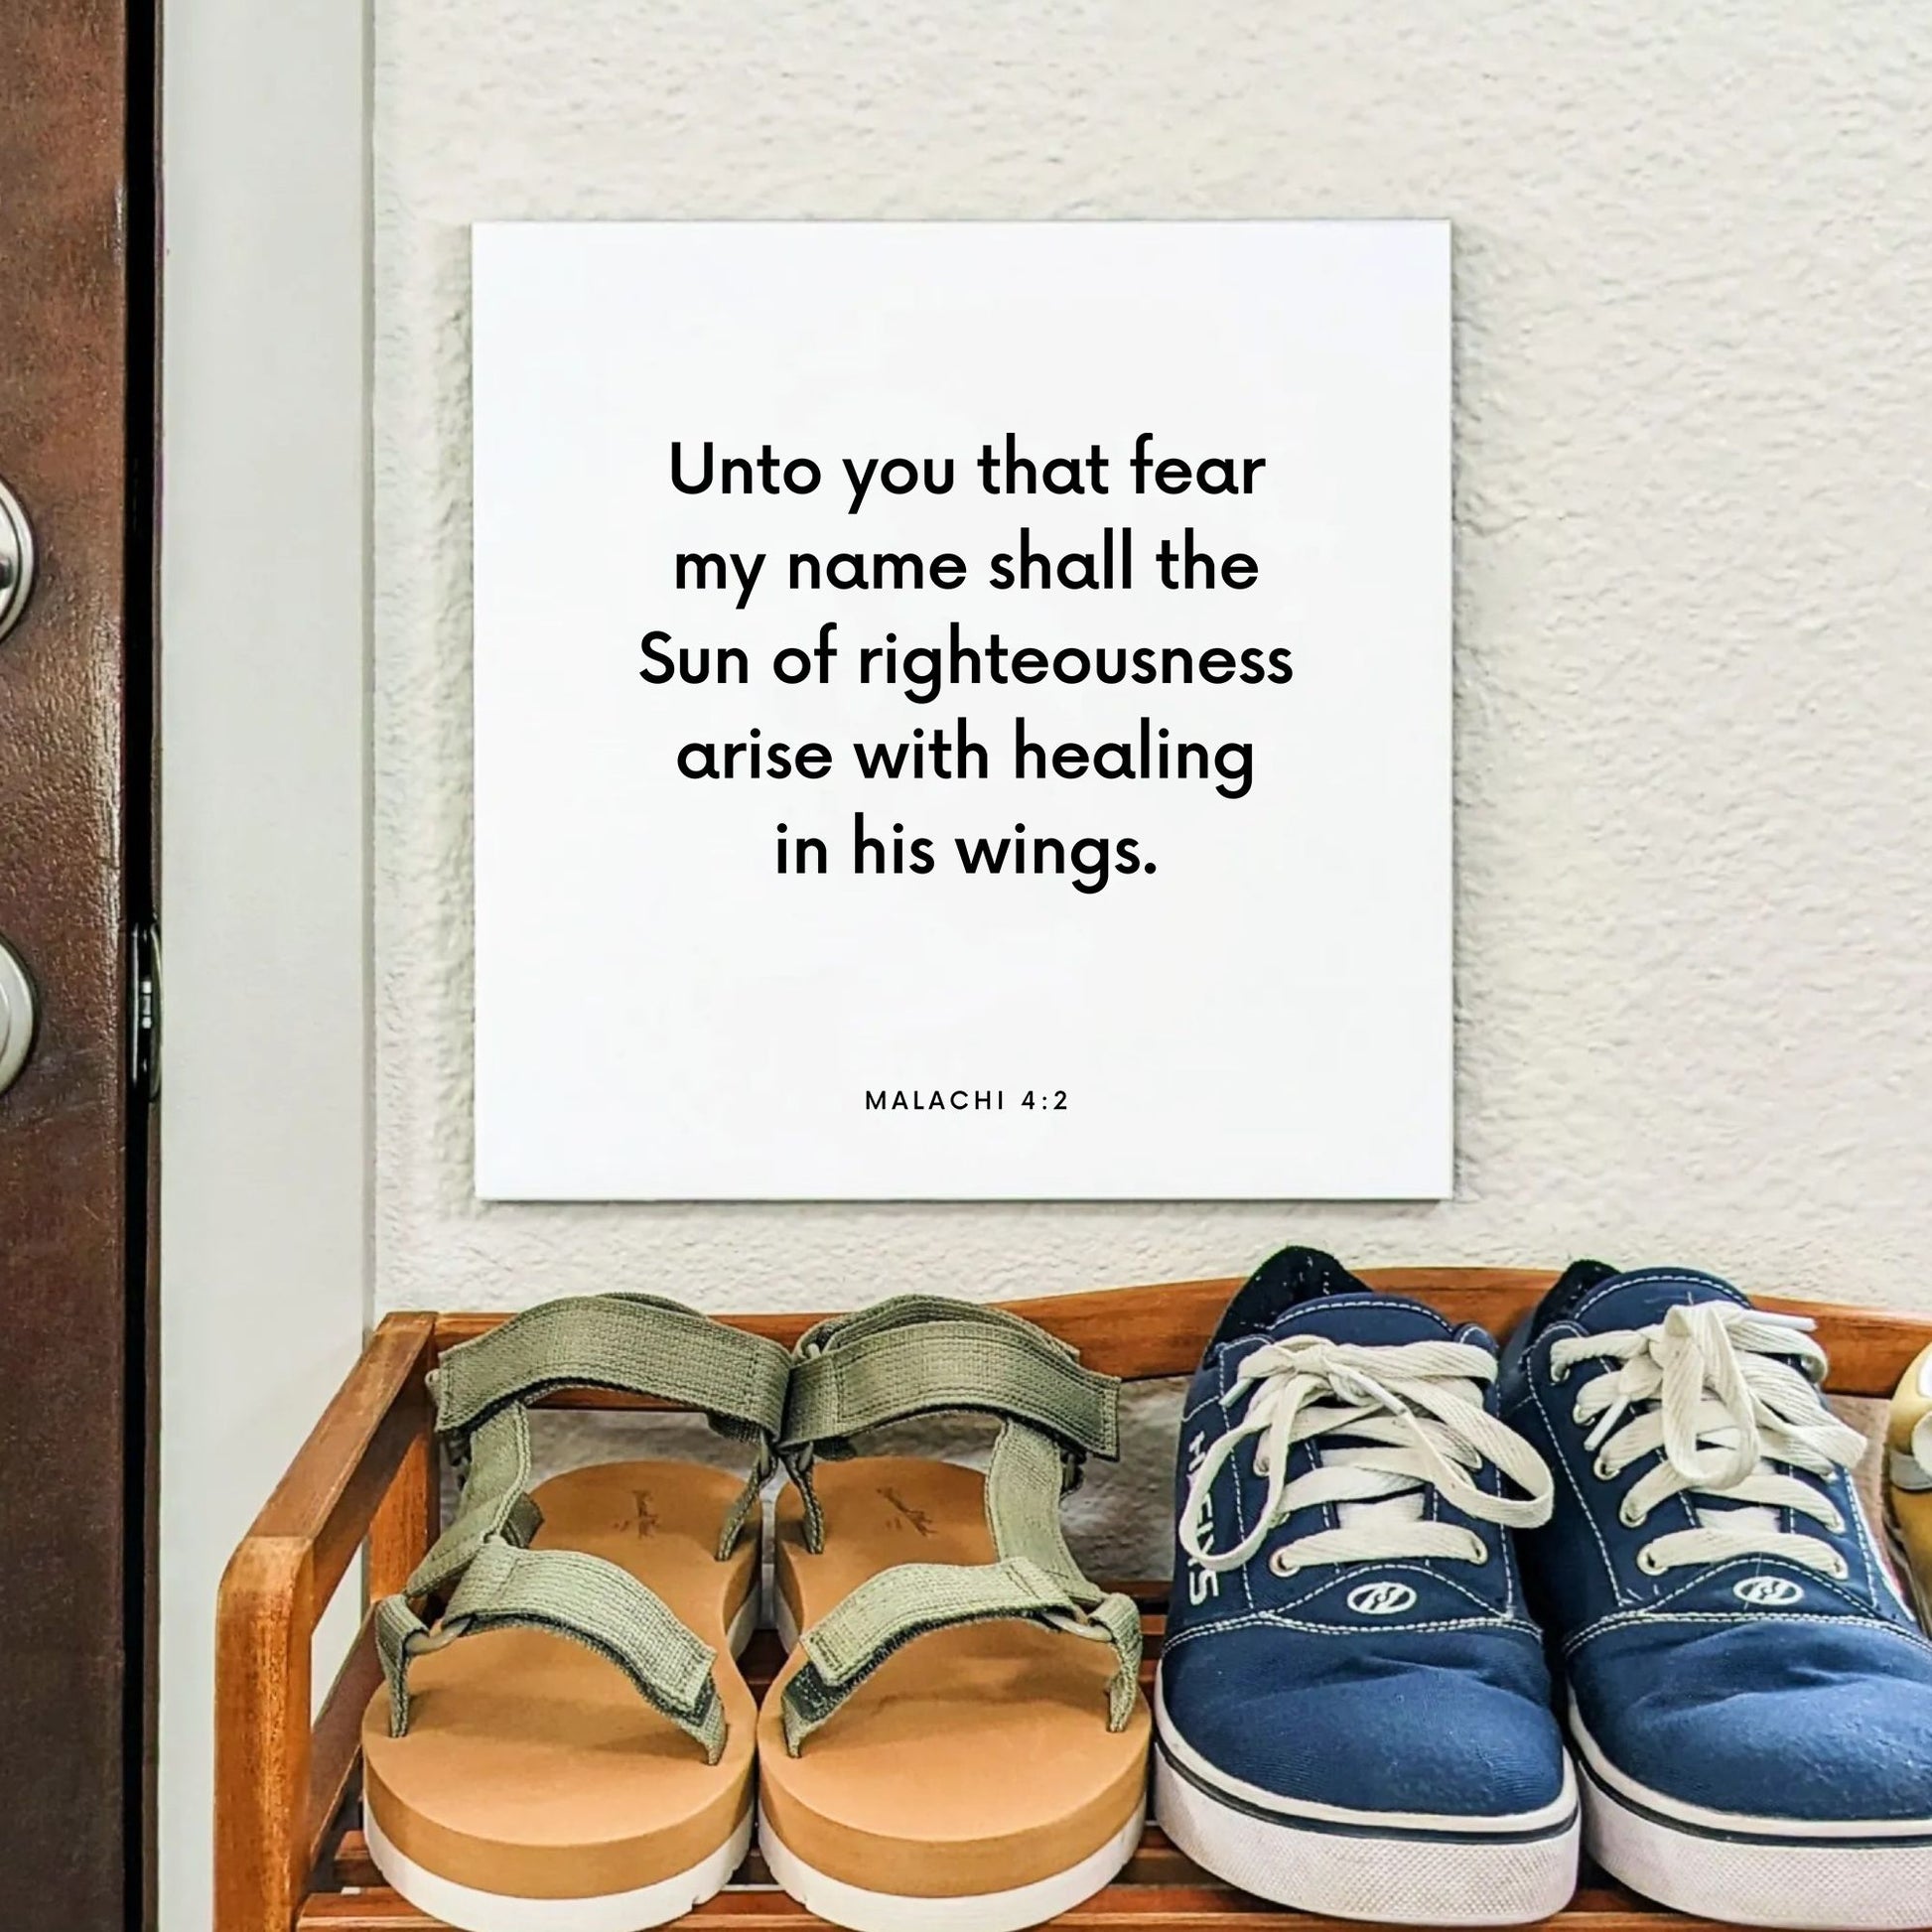 Shoes mouting of the scripture tile for Malachi 4:2 - "Unto you that fear my name"